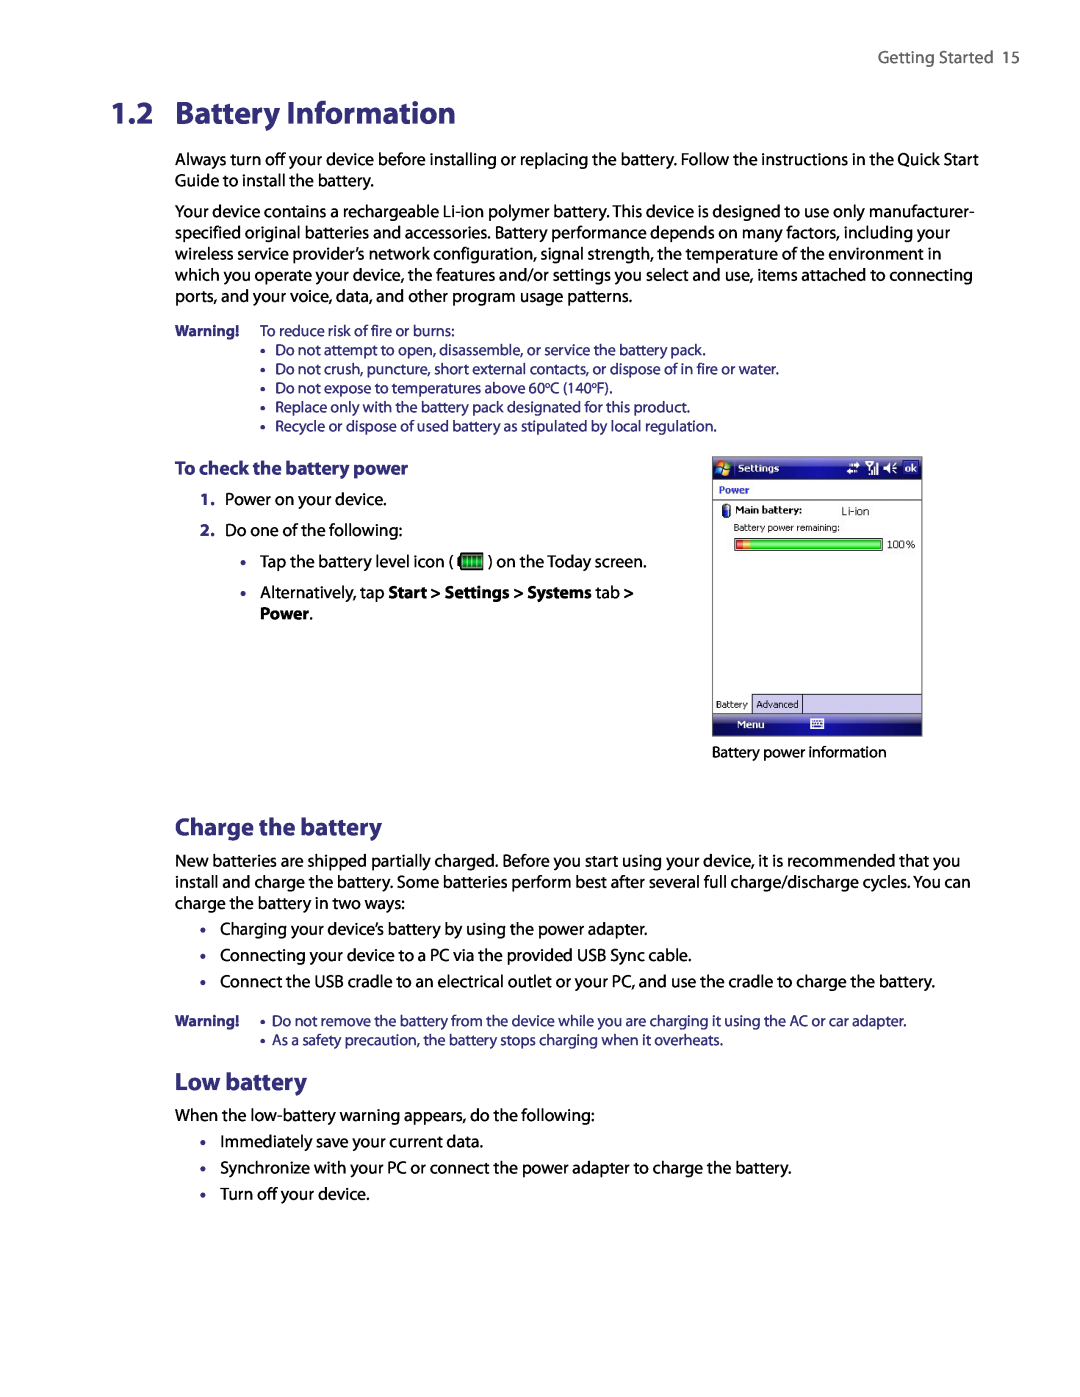 HTC PDA Phone user manual Battery Information, Charge the battery, Low battery, To check the battery power, Getting Started 